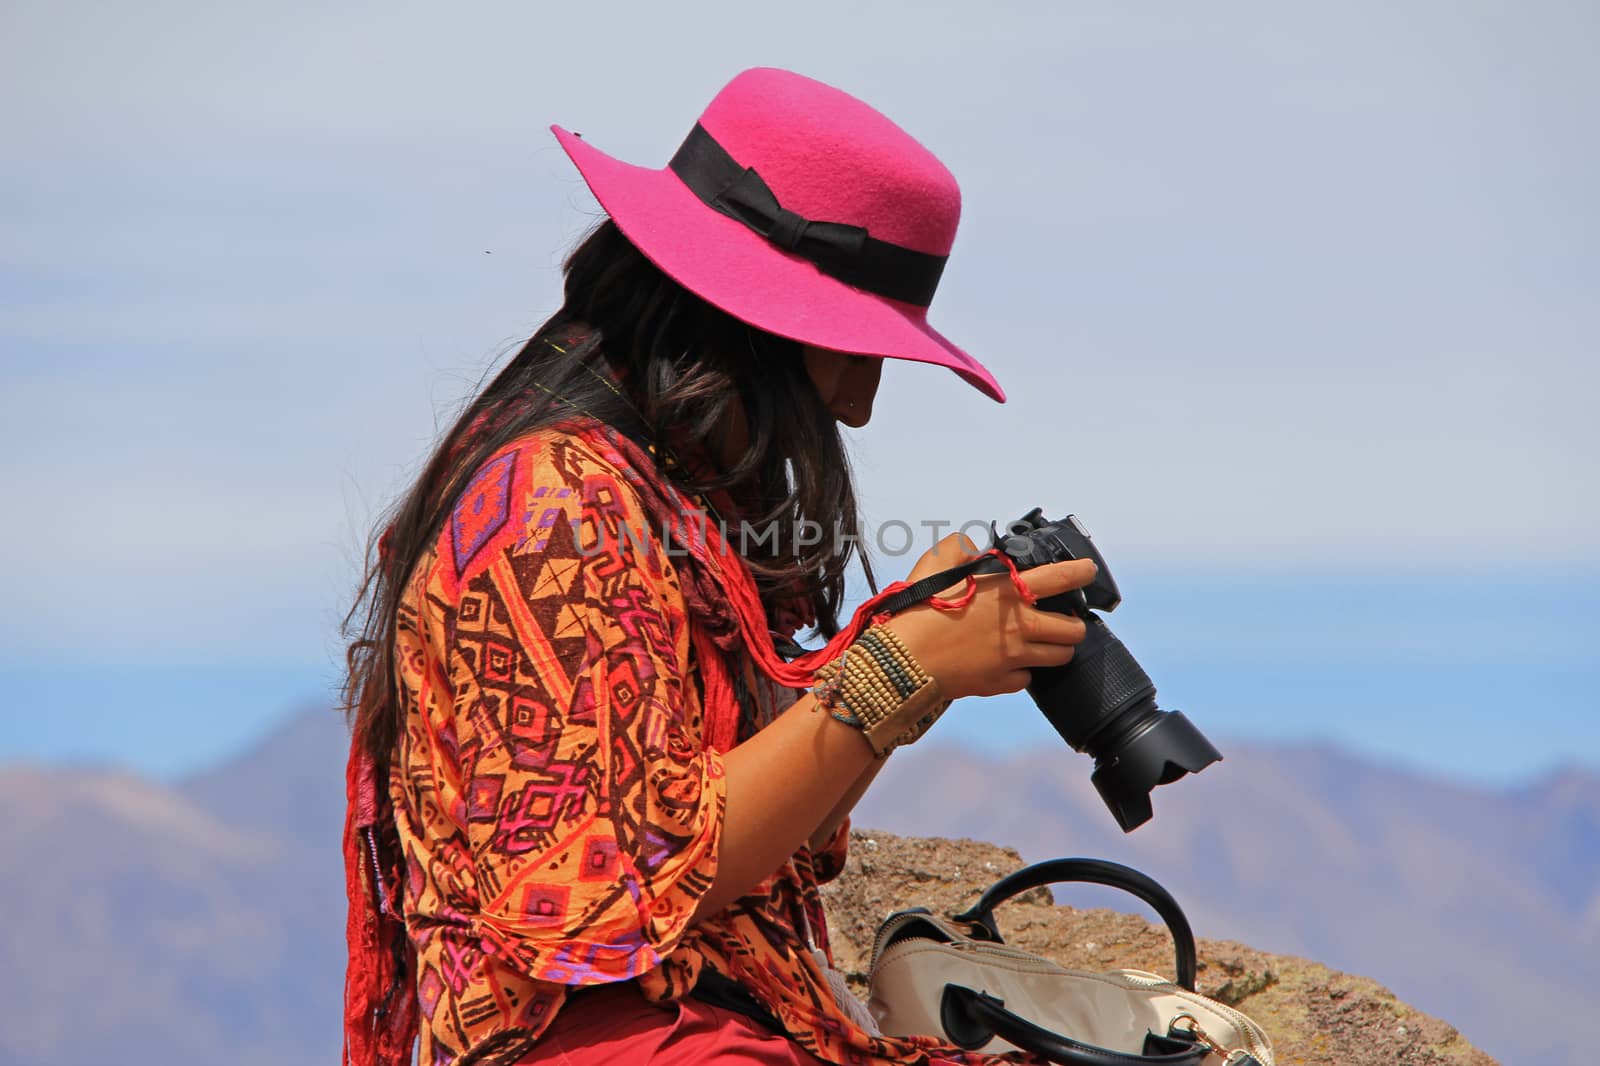 A young lady with her camera in Colca Canyon, Peru
17 Dec 2013
No model release
Editorial only